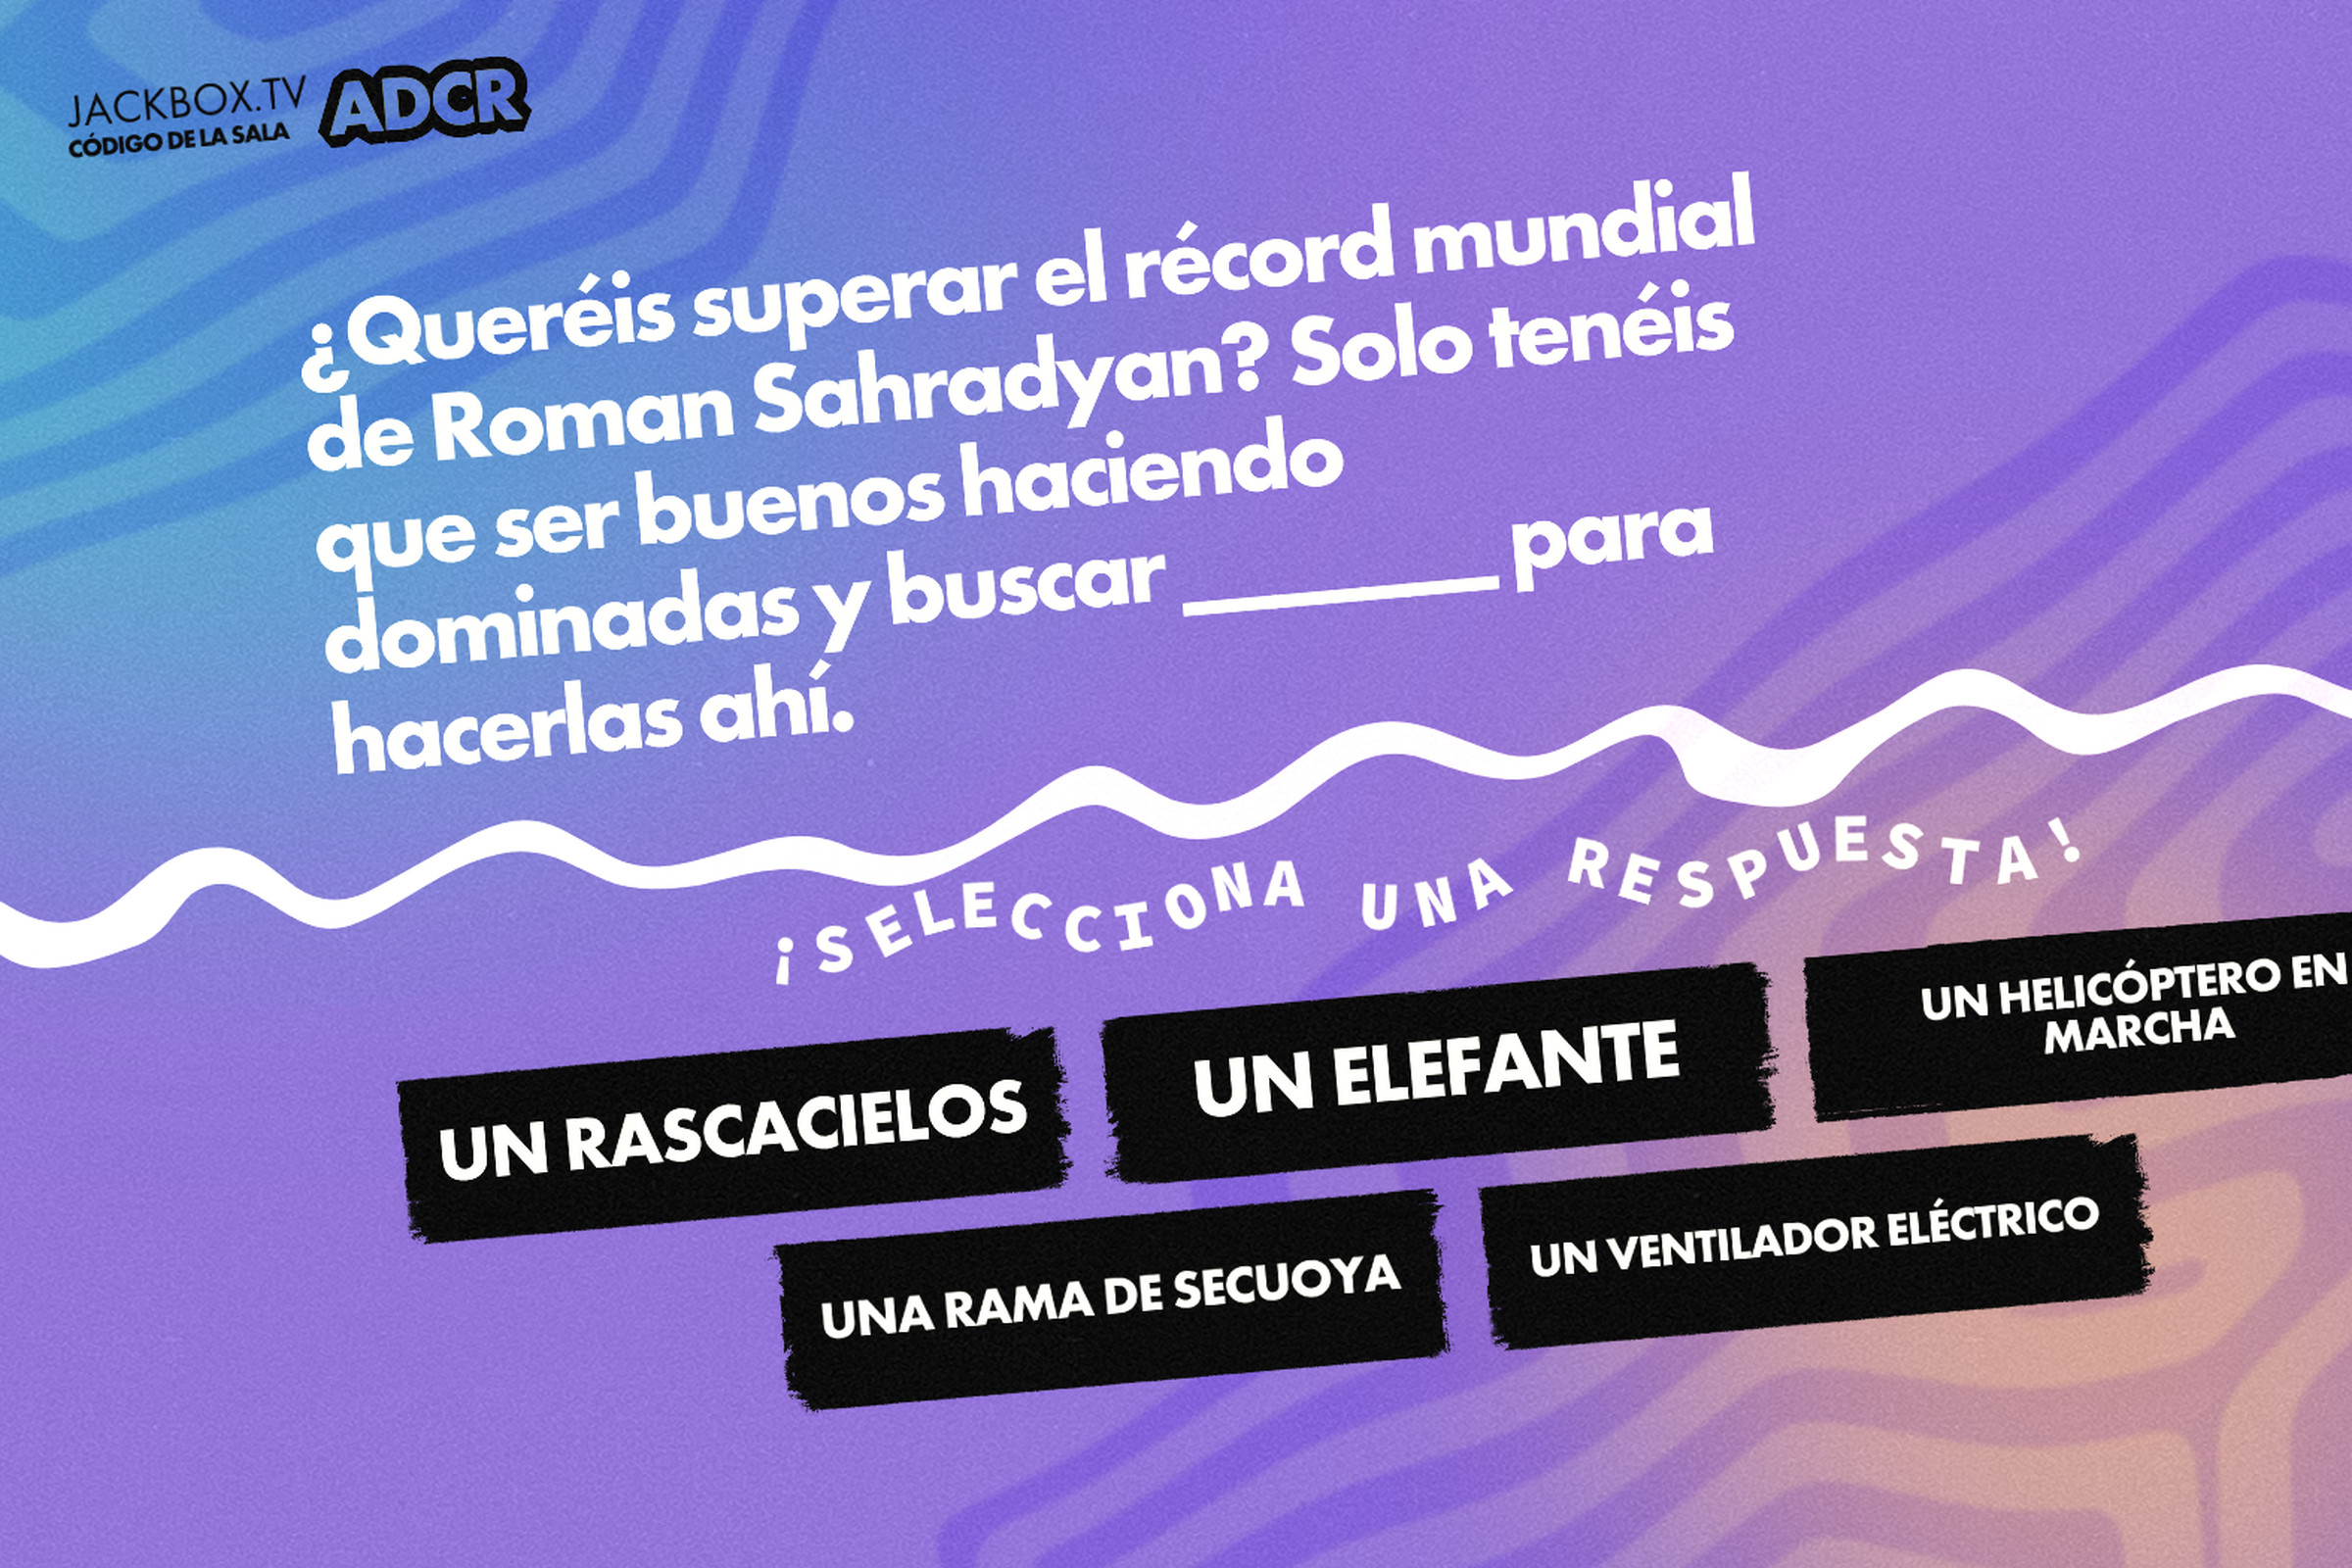 Jackbox 9 is now available in French, Italian, German, and two types of Spanish